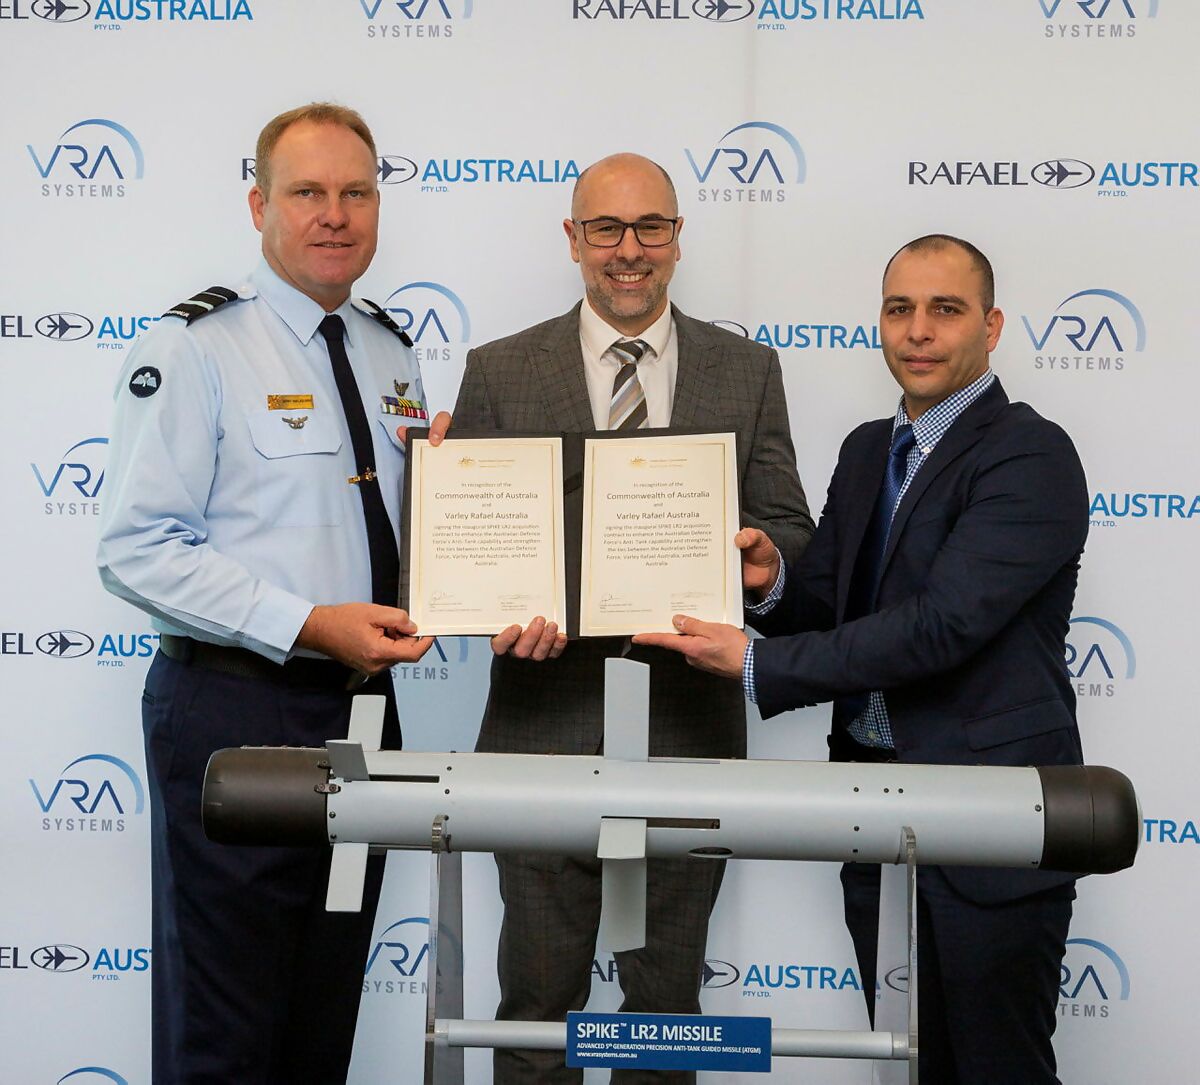 Rafael Australia (Rafael) has announced that it has finalised a substantial acquisition contract with the Australian Government to provide the Australian Defence Force (ADF) with the next generation of Guided Weapons and Explosive Ordnance (GWEO) systems in Rafael's  SPIKE LR2 Anti-Tank Guided Missile (ATGM).